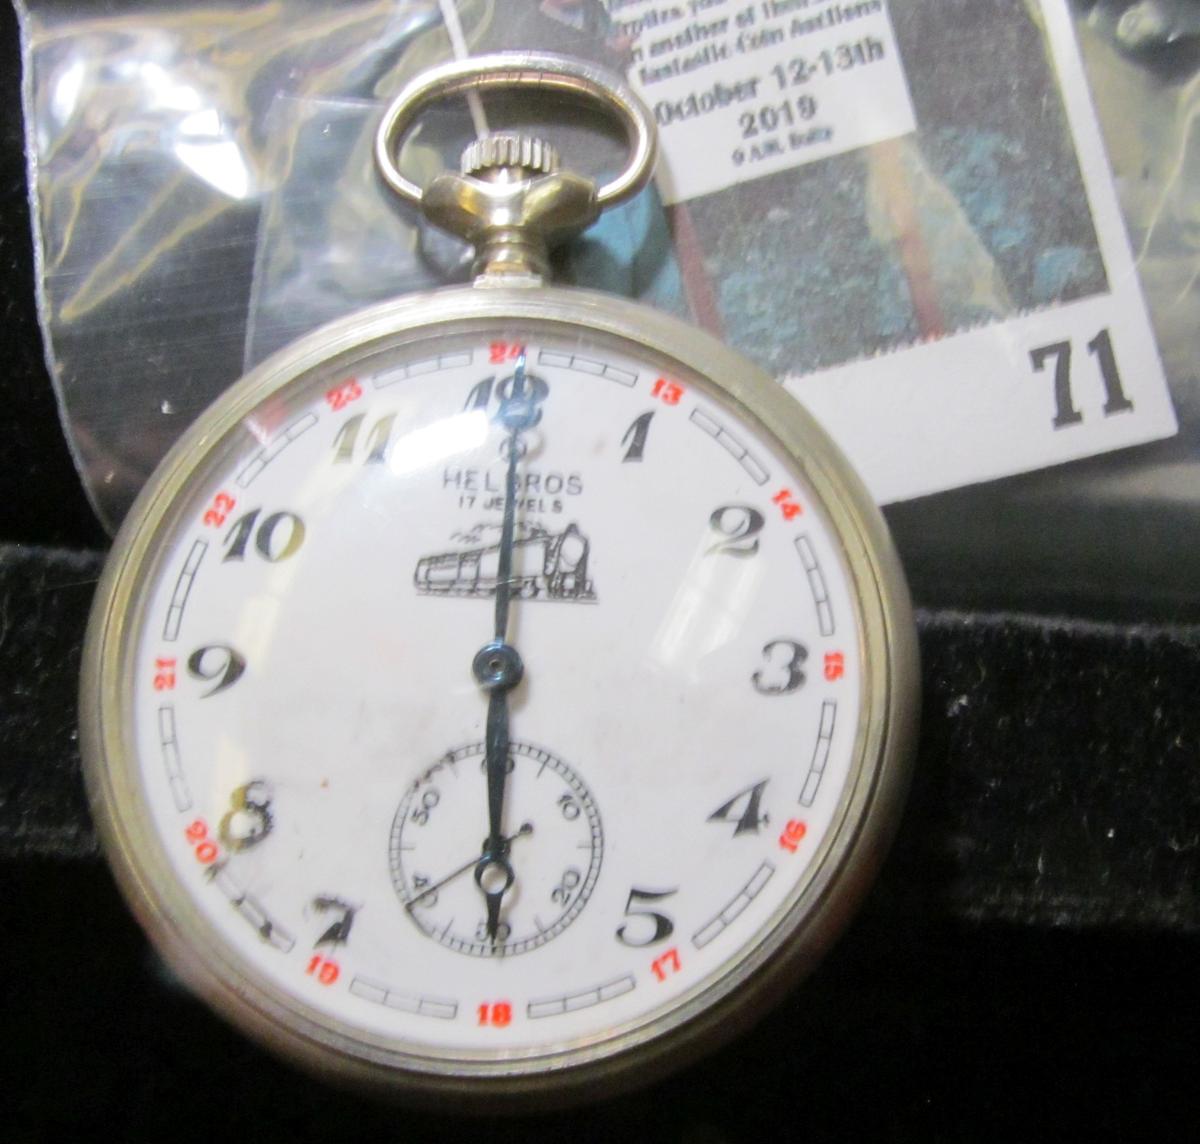 Helbros 17 jewel red numbered pocket watch, starts but will not run, good for parts or repair, has a